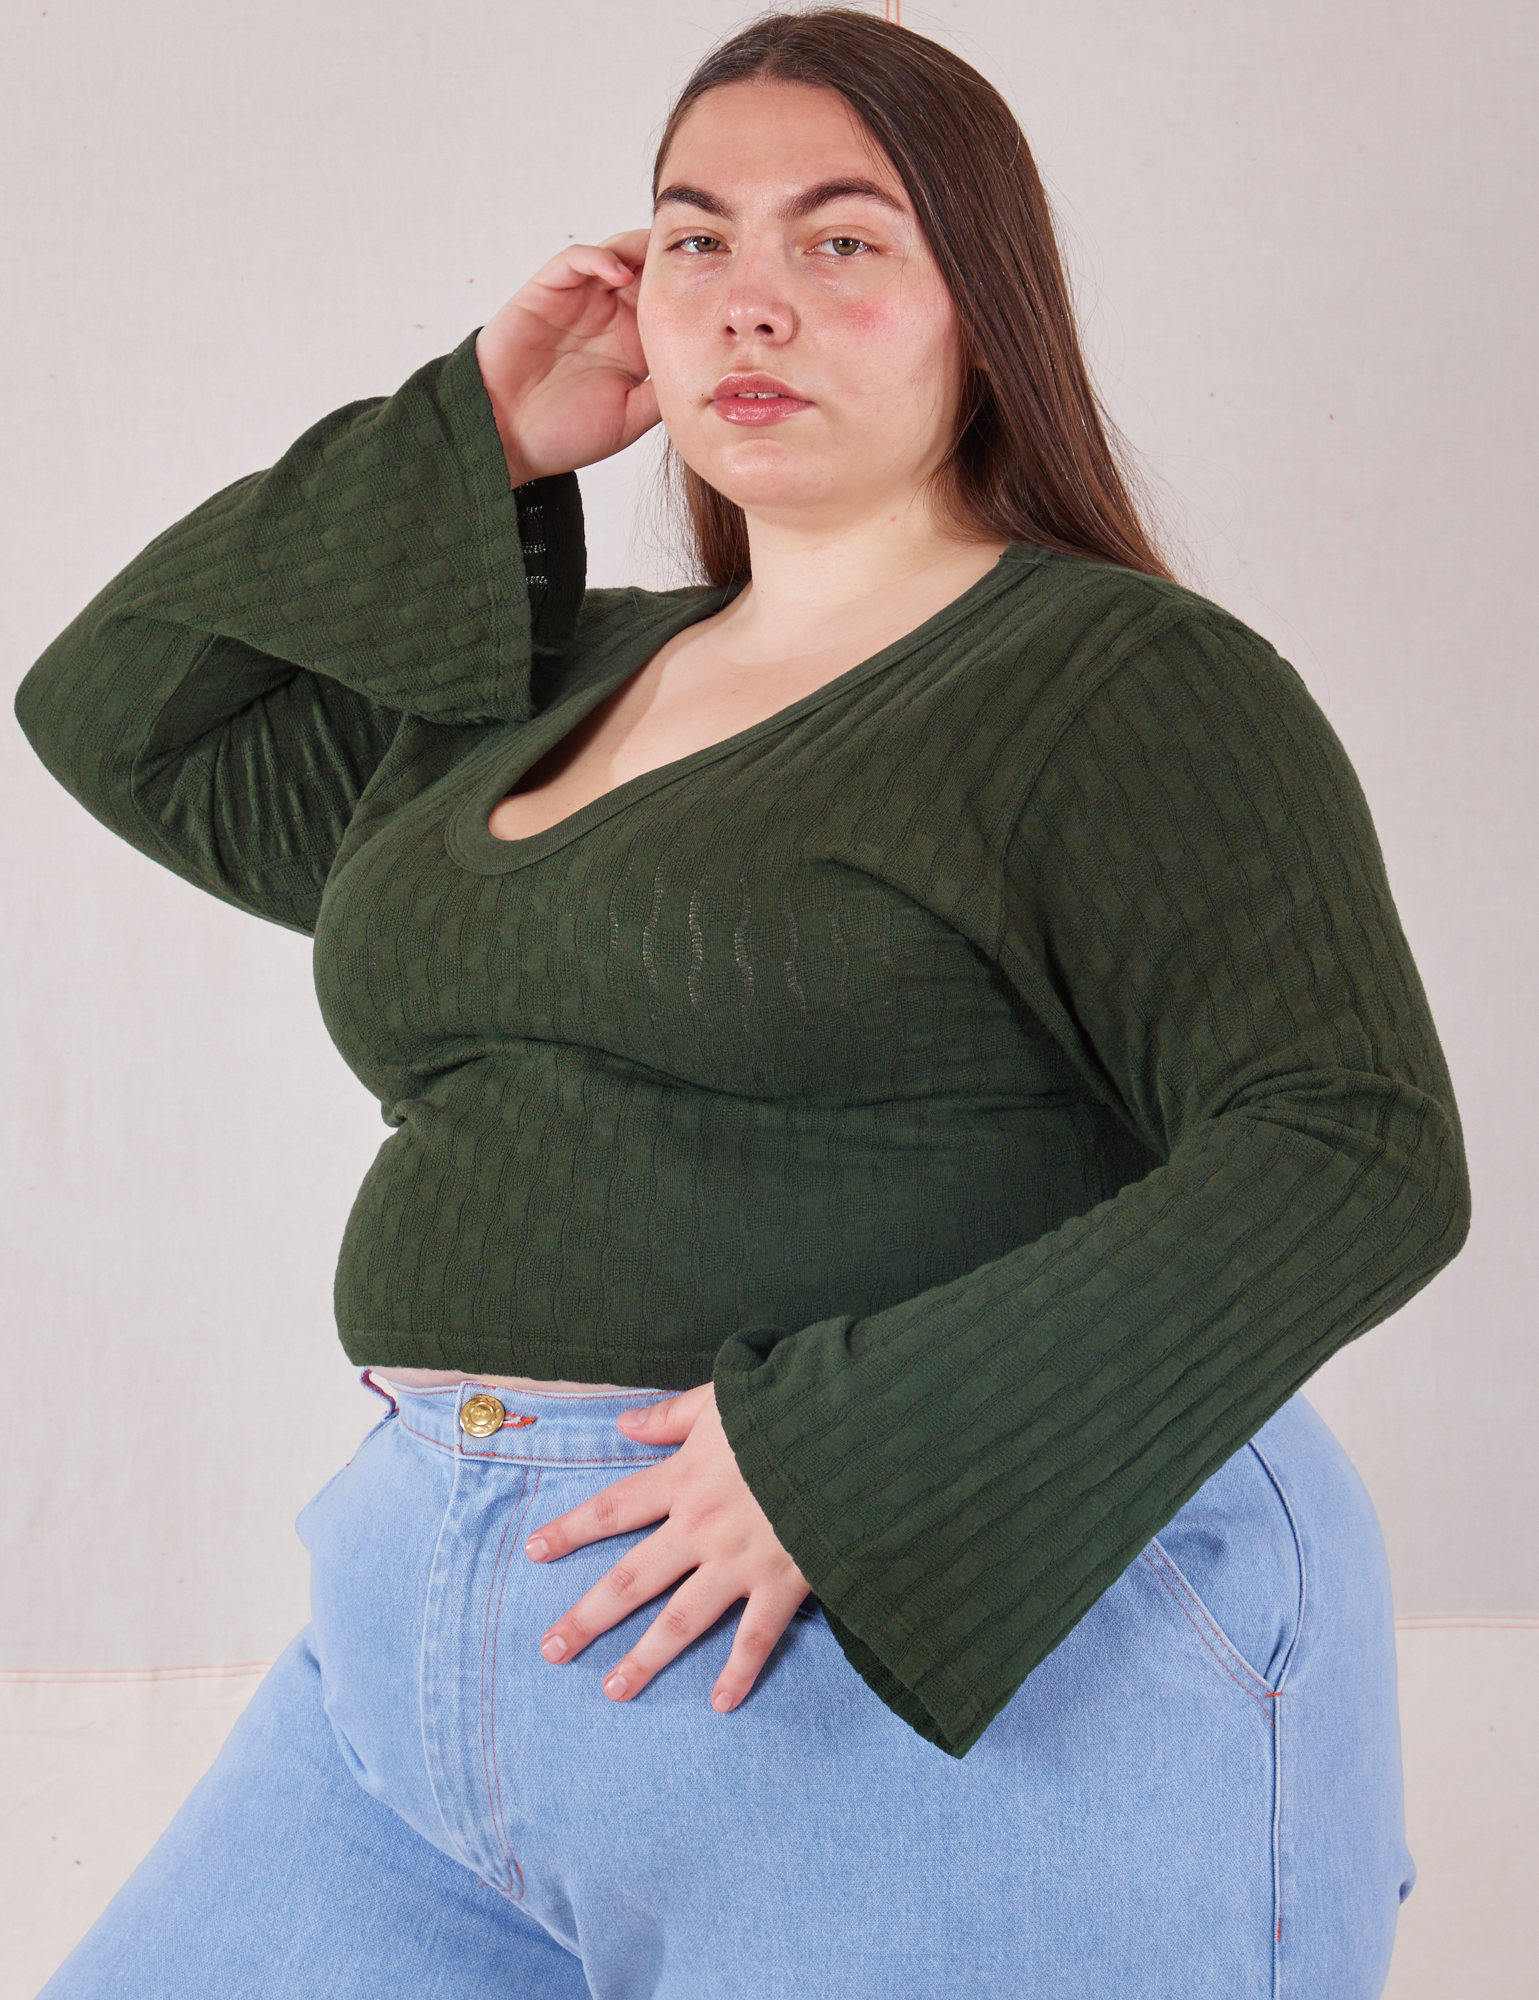 Bell Sleeve Top in Swamp Green angled front view on Marielena